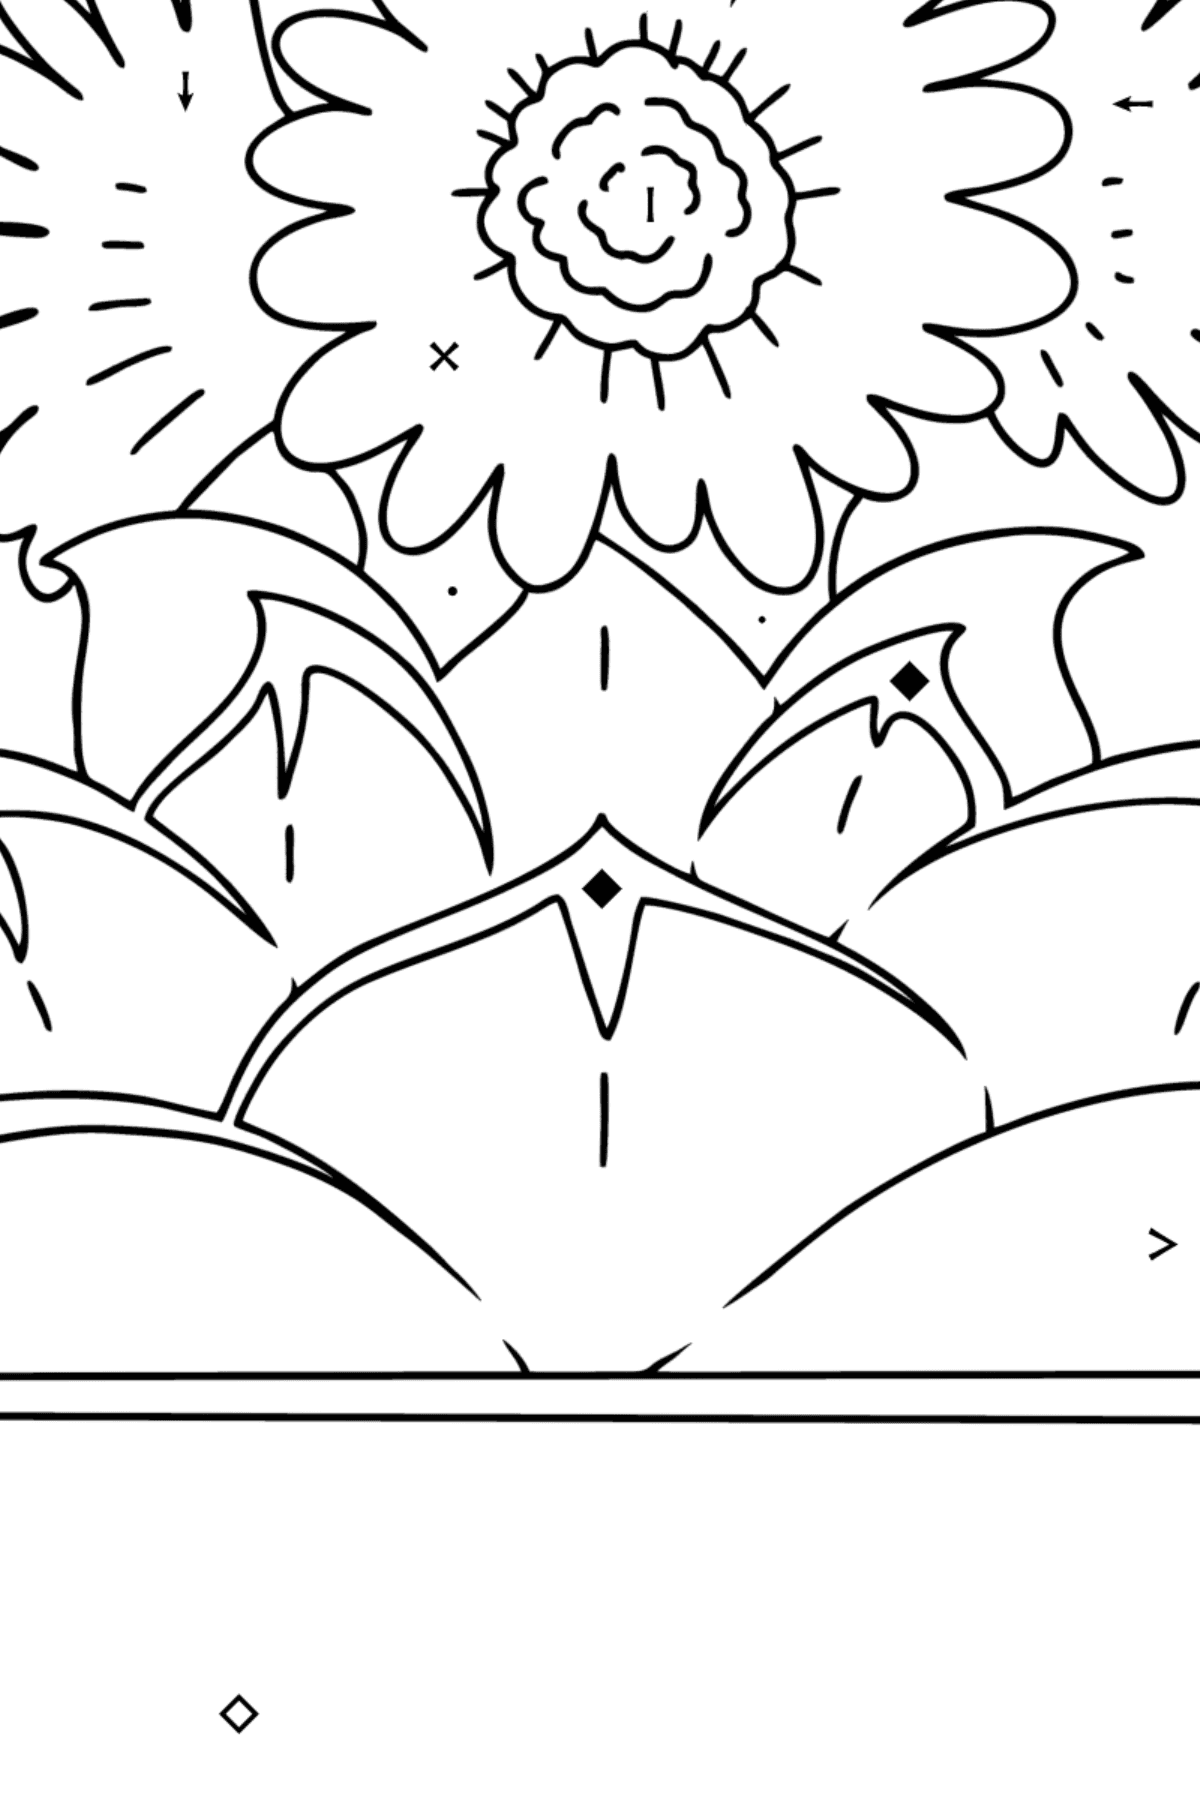 Echinocactus Grusonii coloring page - Coloring by Symbols for Kids